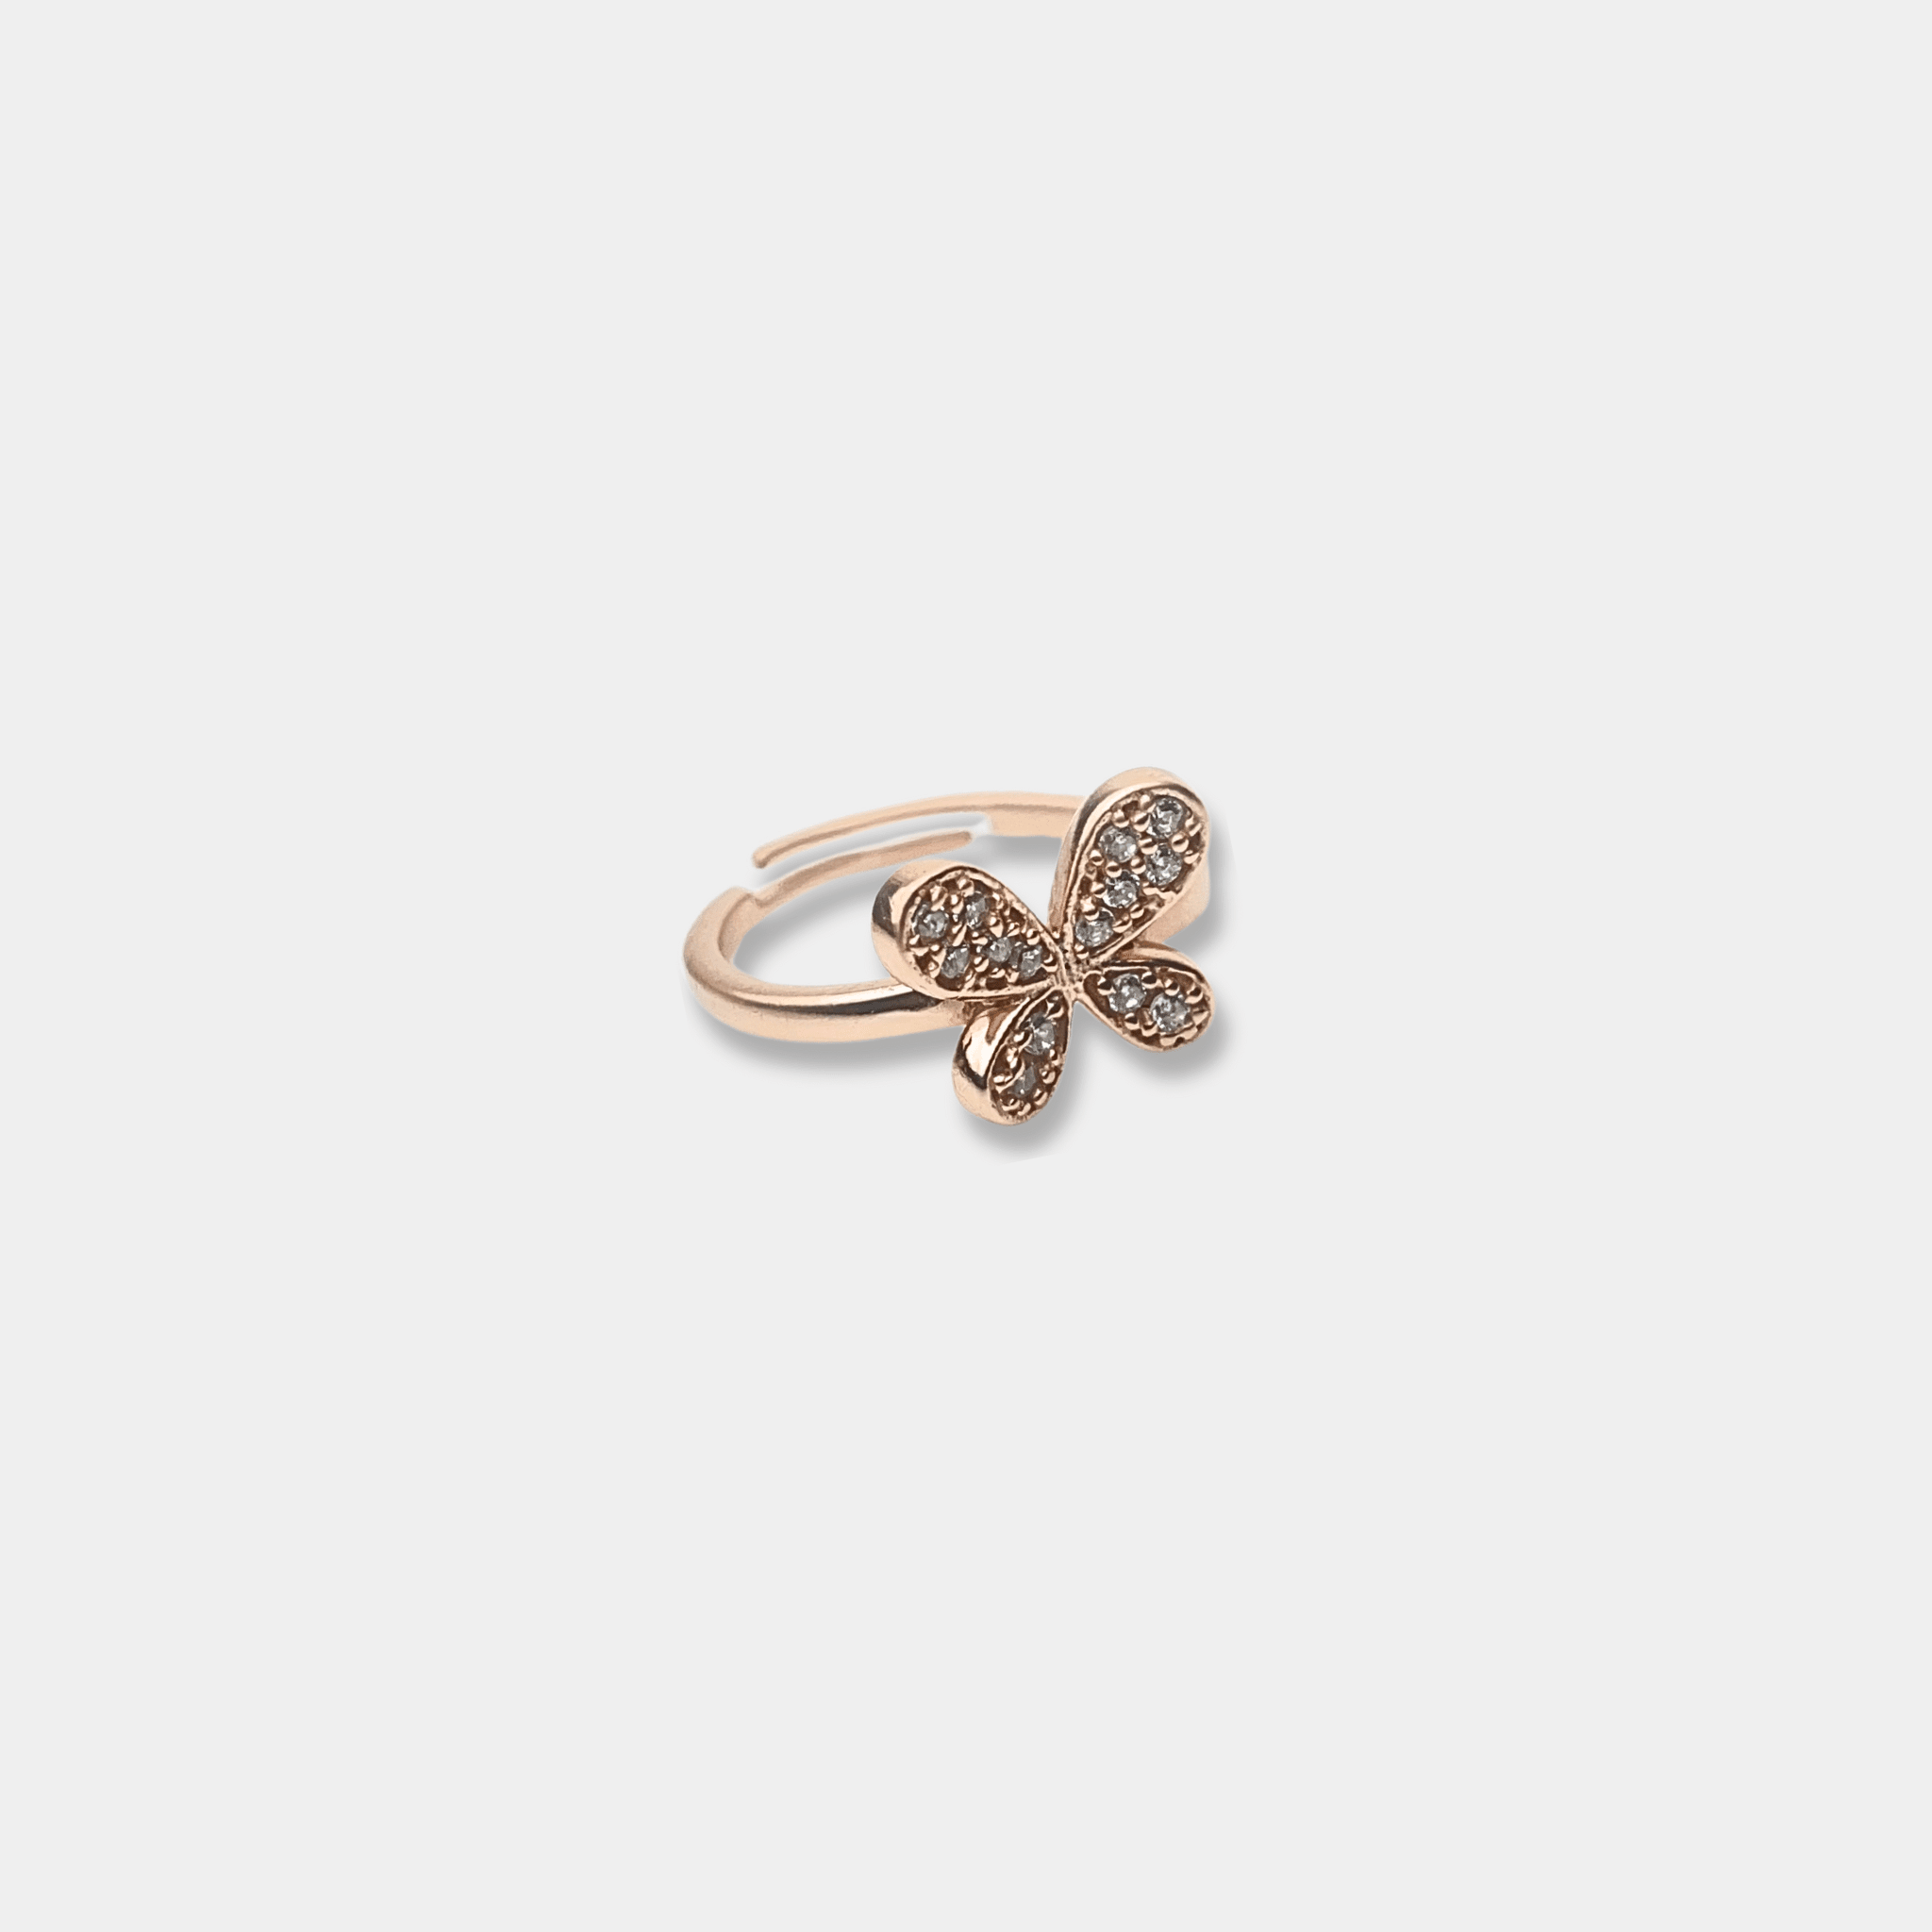 Sterling silver butterfly ring with diamond accents.